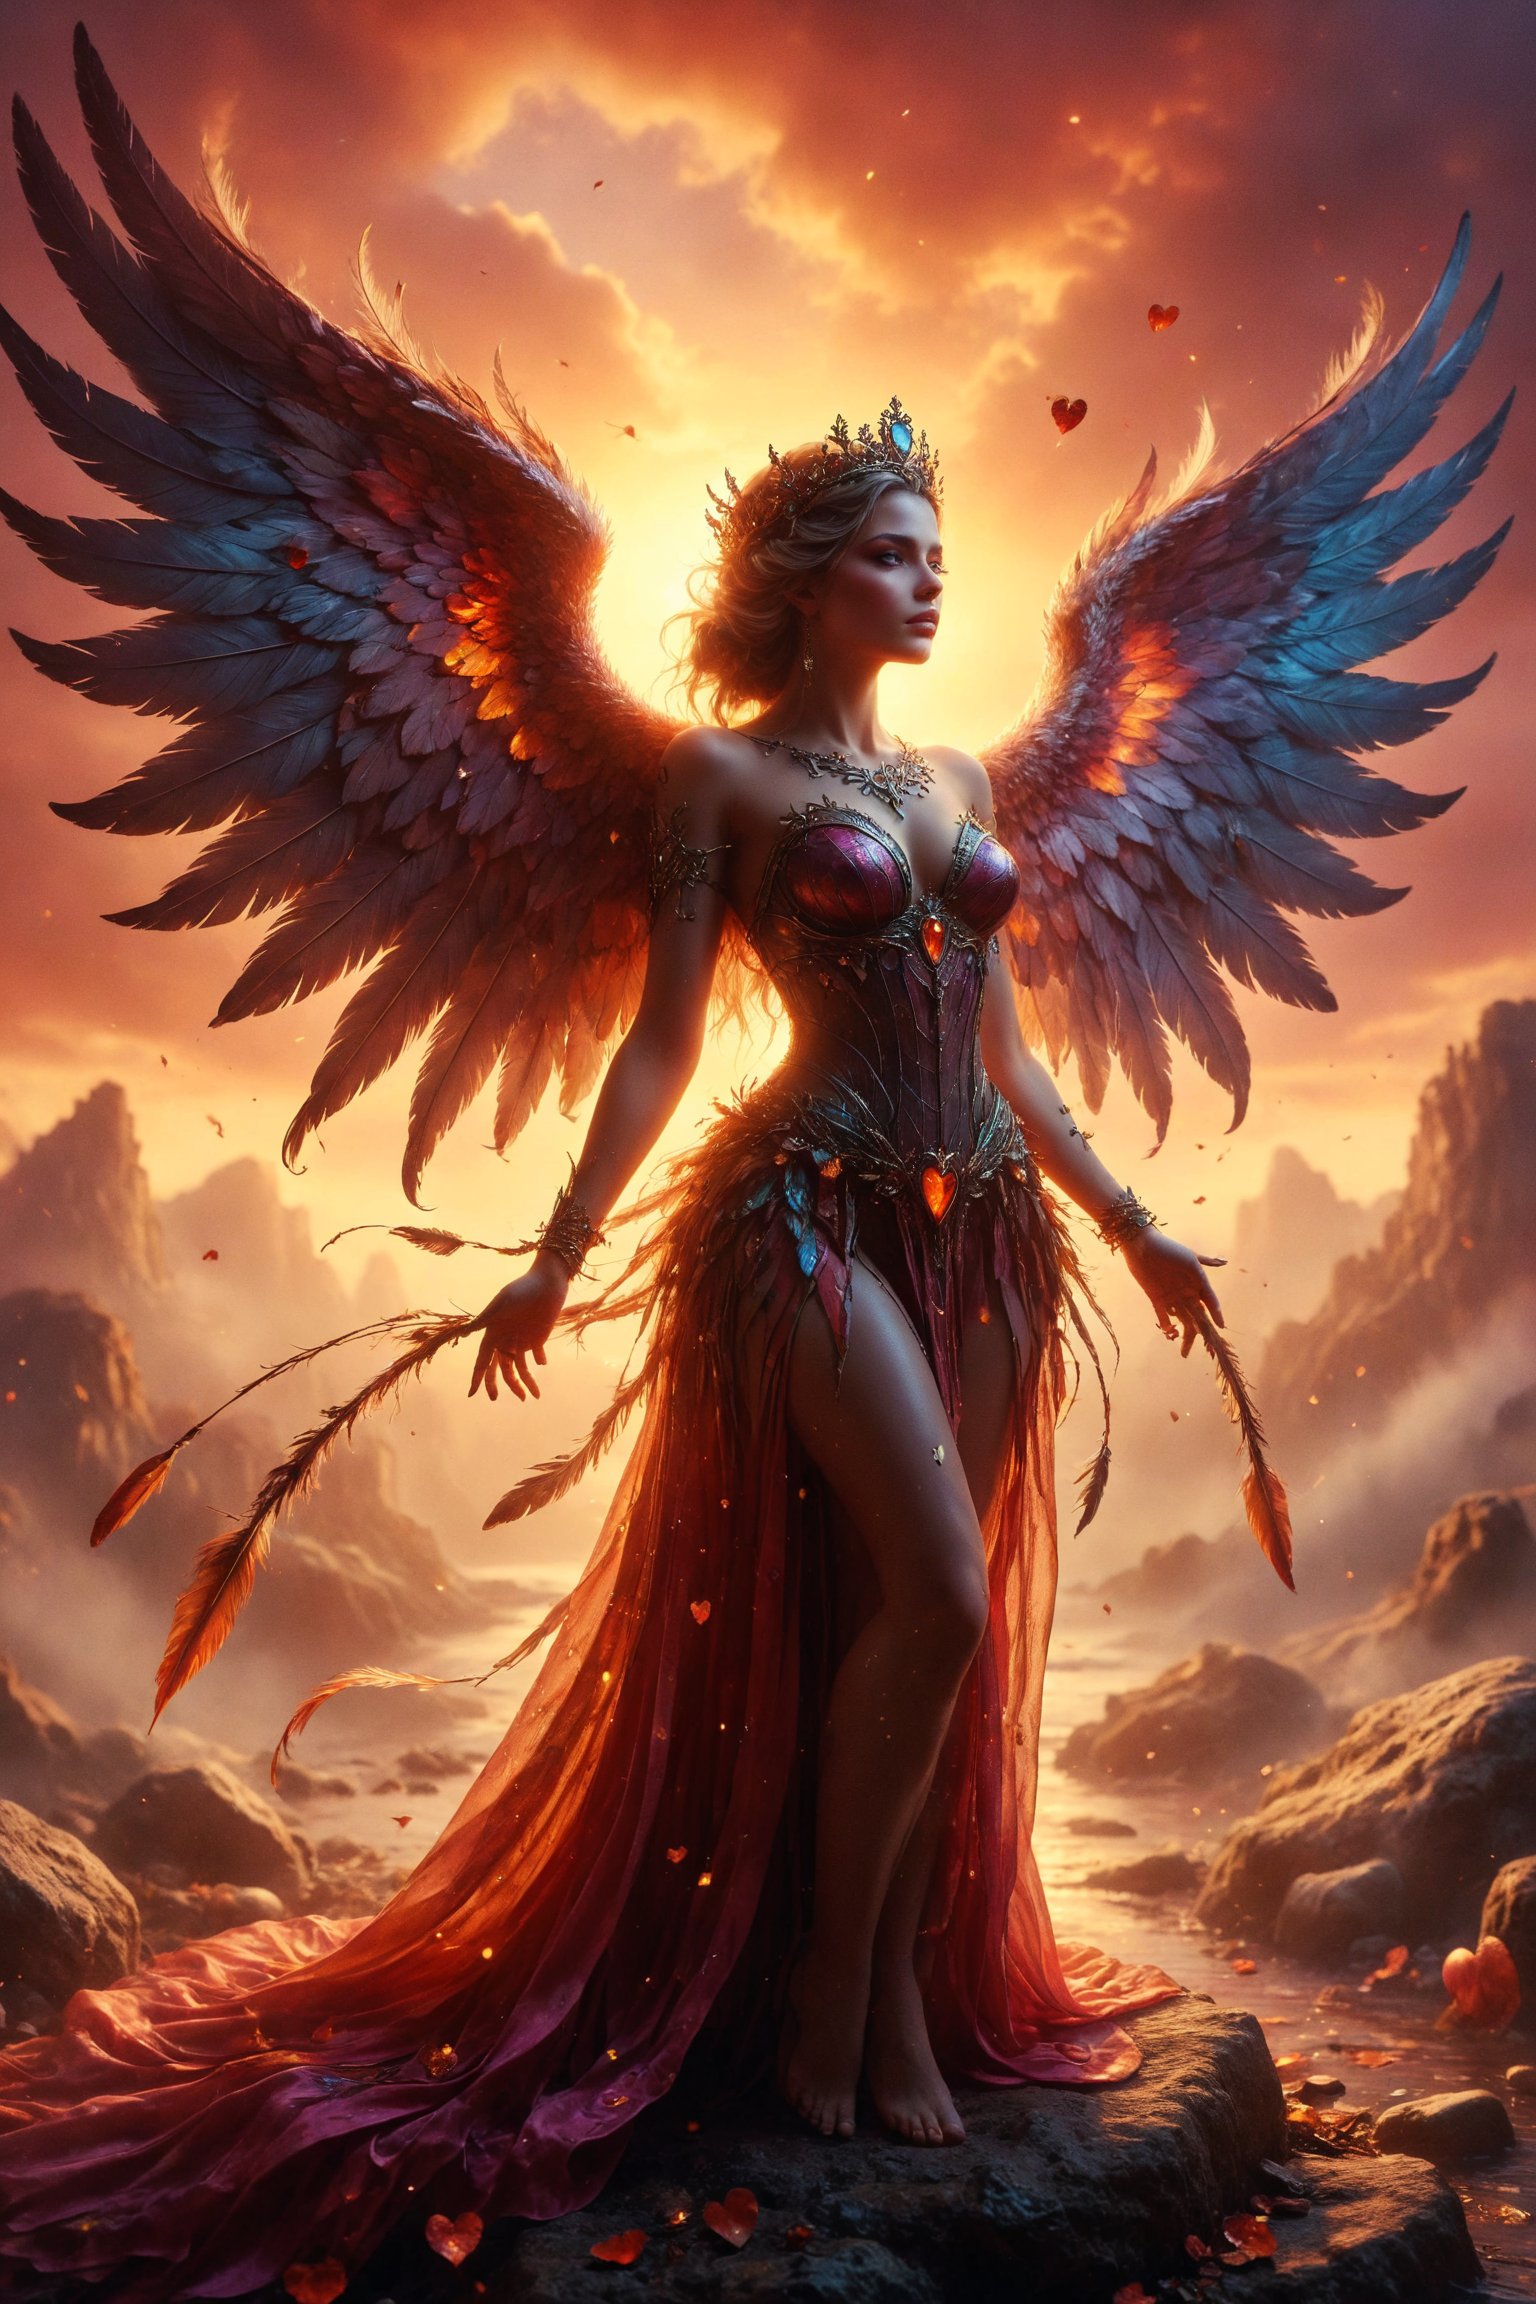 queen of love full body, Amor embodies beauty and passion, with wings that shimmer like the colors of a sunset. with hearts and feather love  His arrows pierce hearts with feelings of love and desire, and his presence inspires romance and devotion.